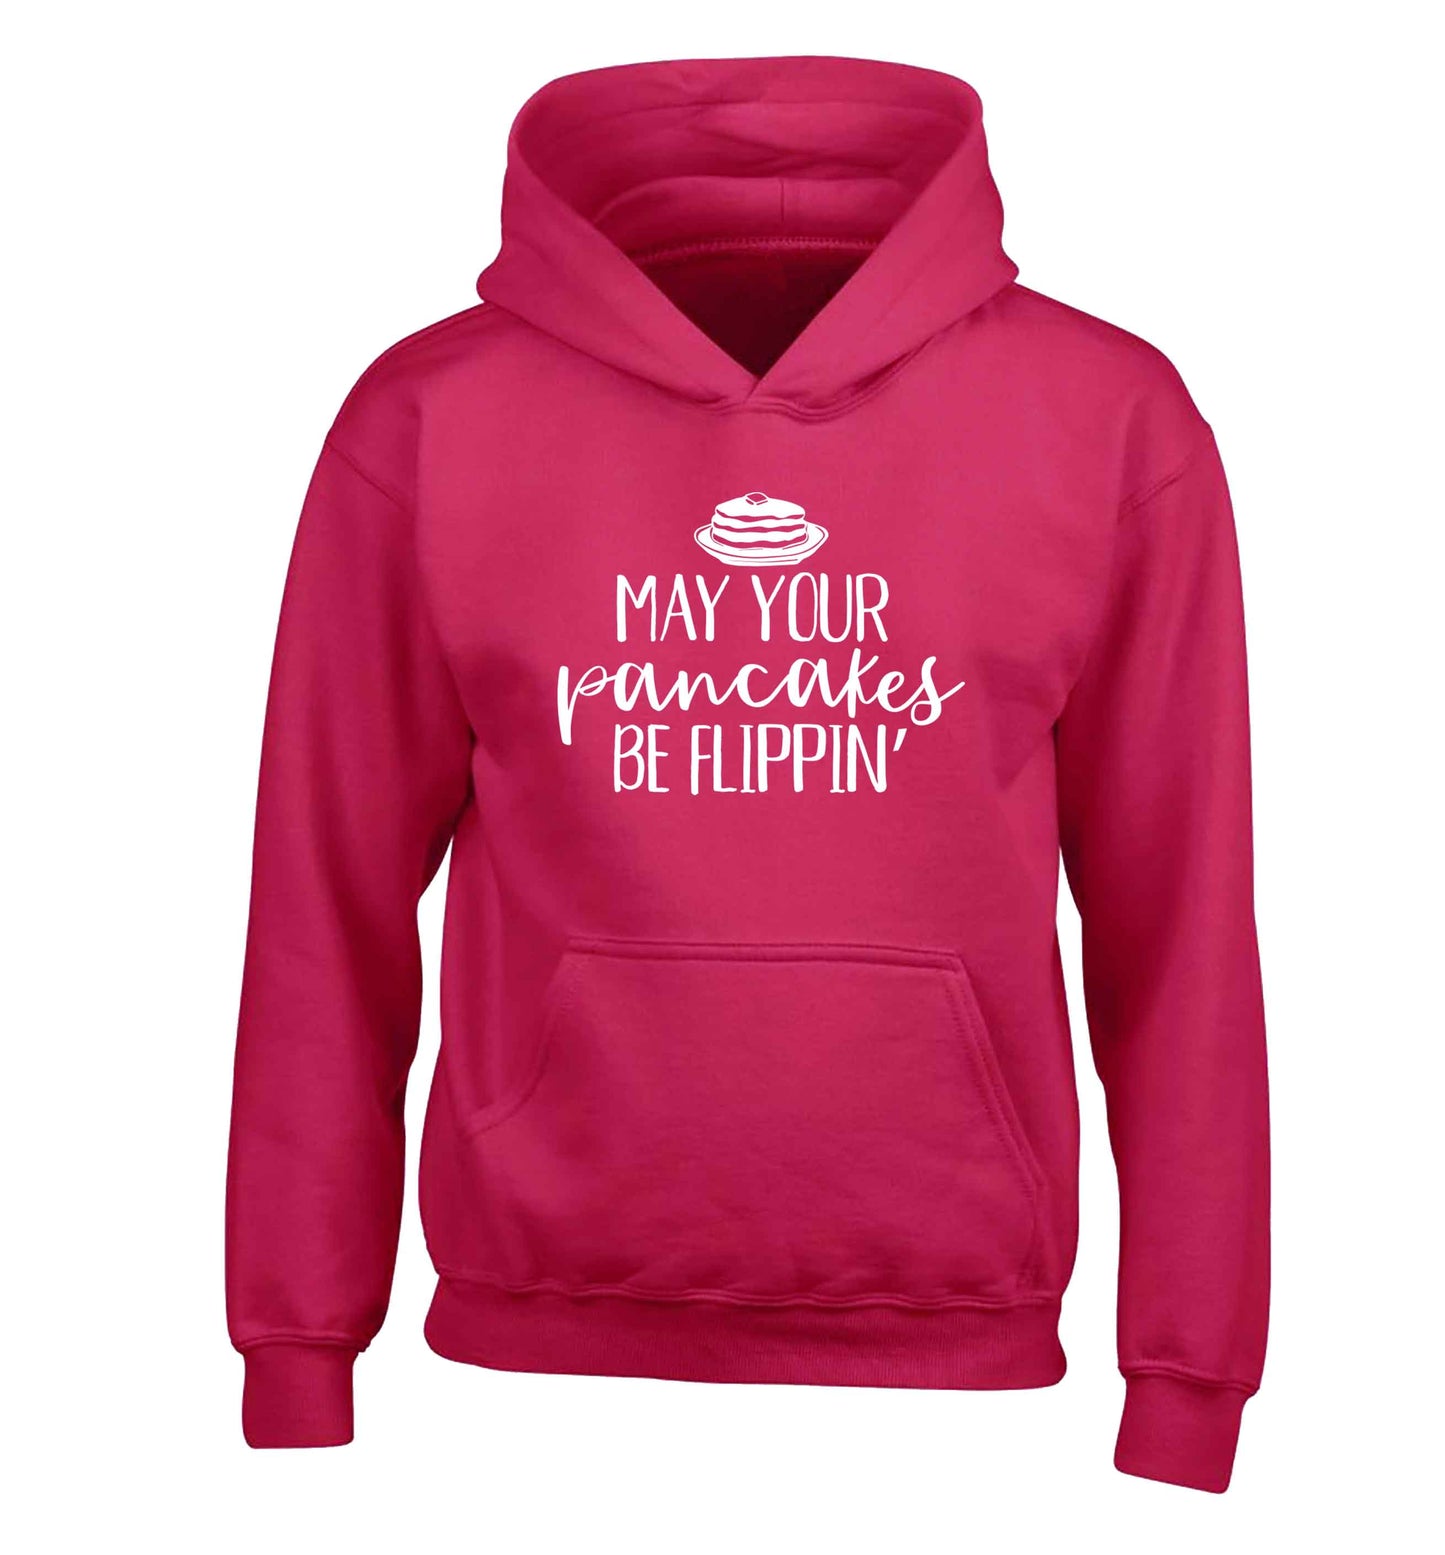 May your pancakes be flippin' children's pink hoodie 12-13 Years